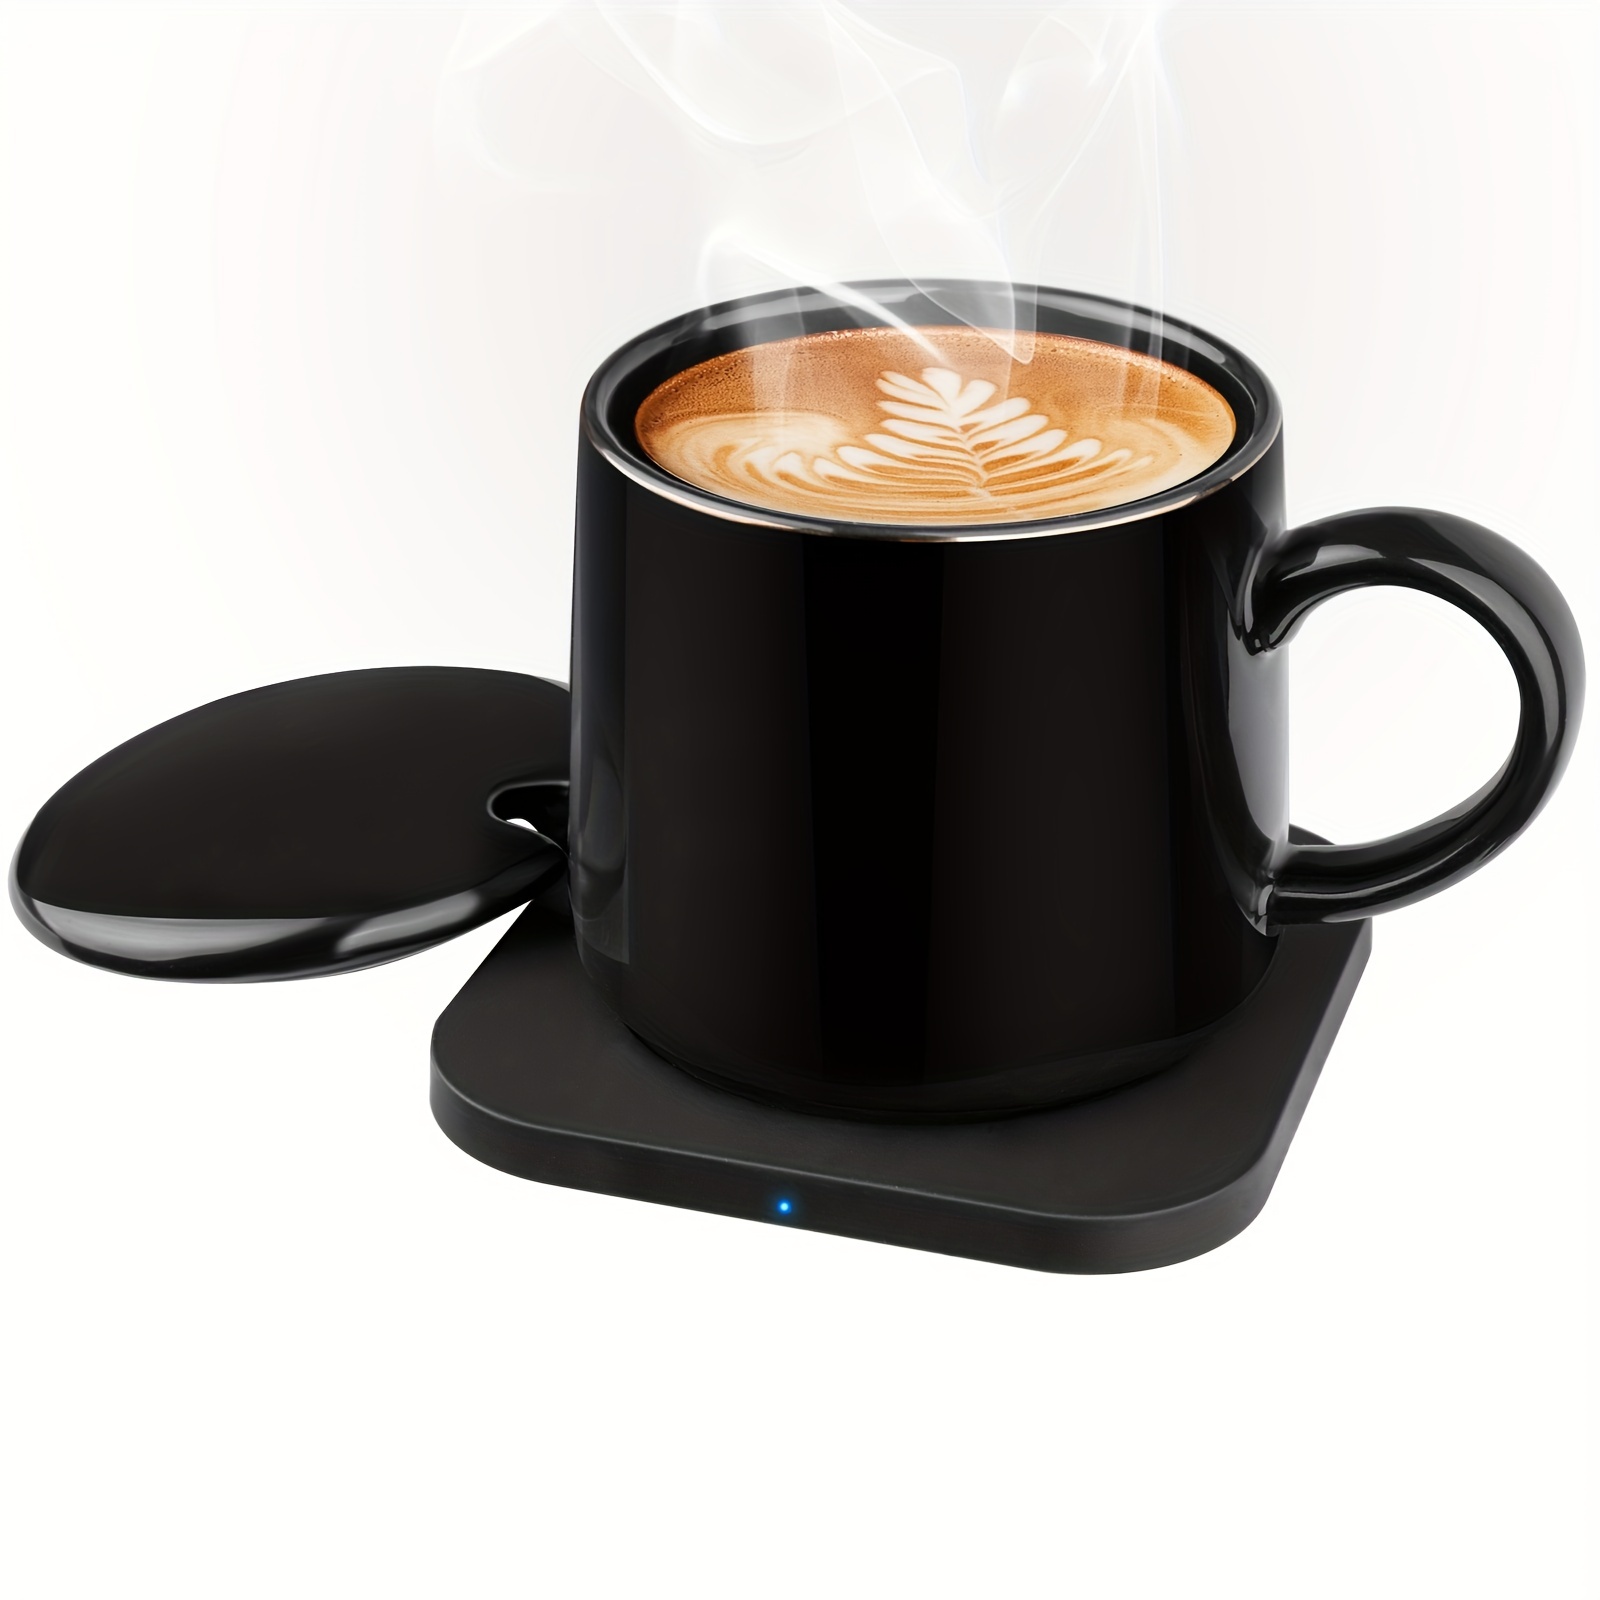 Smart Degrees Ember Mug Warmer Set - White Ceramic Coffee Cup Warmer for  Desk with USB Coaster, Self…See more Smart Degrees Ember Mug Warmer Set 